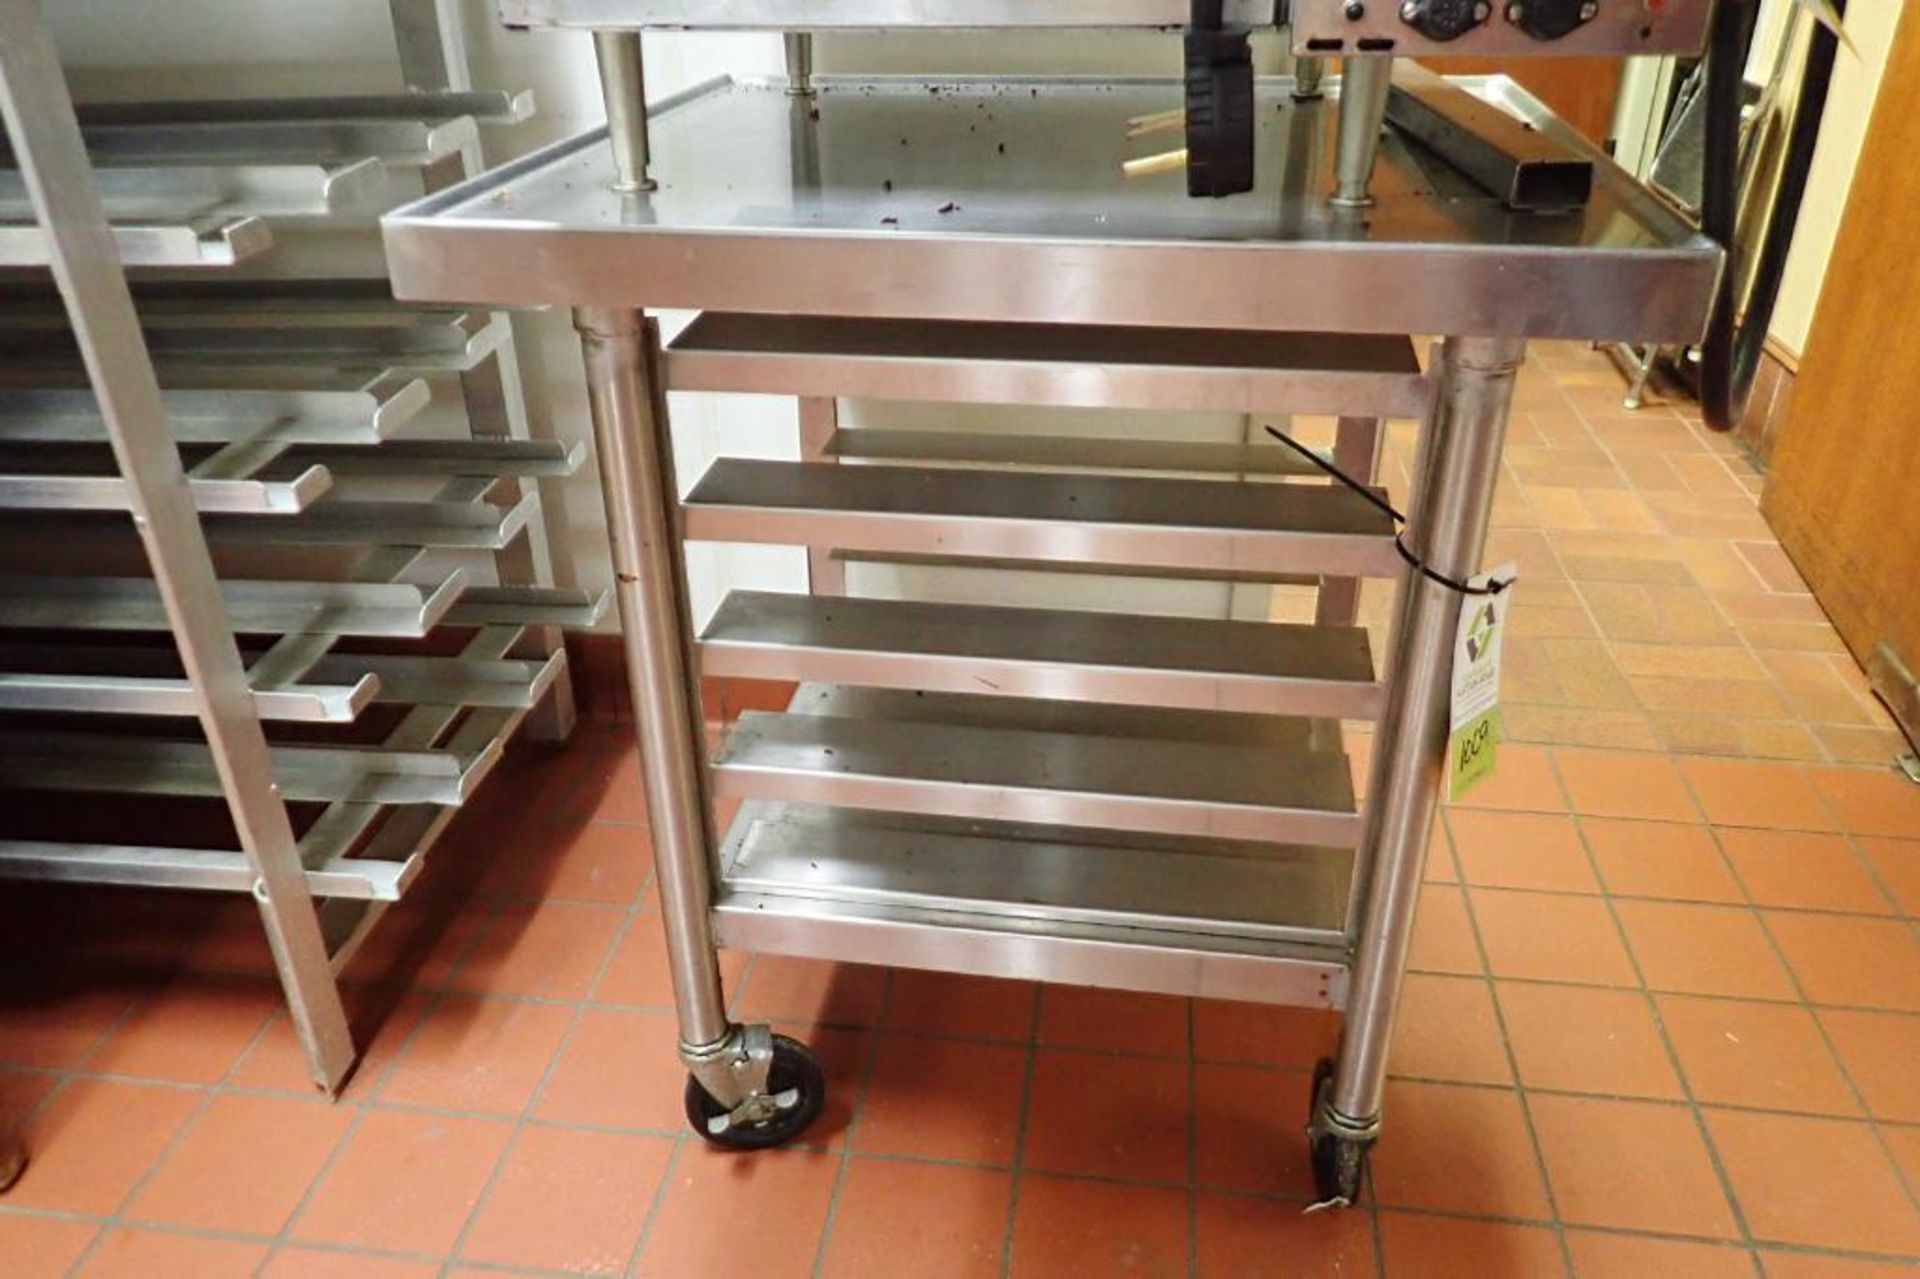 SS table on casters with 4 shelves for trays